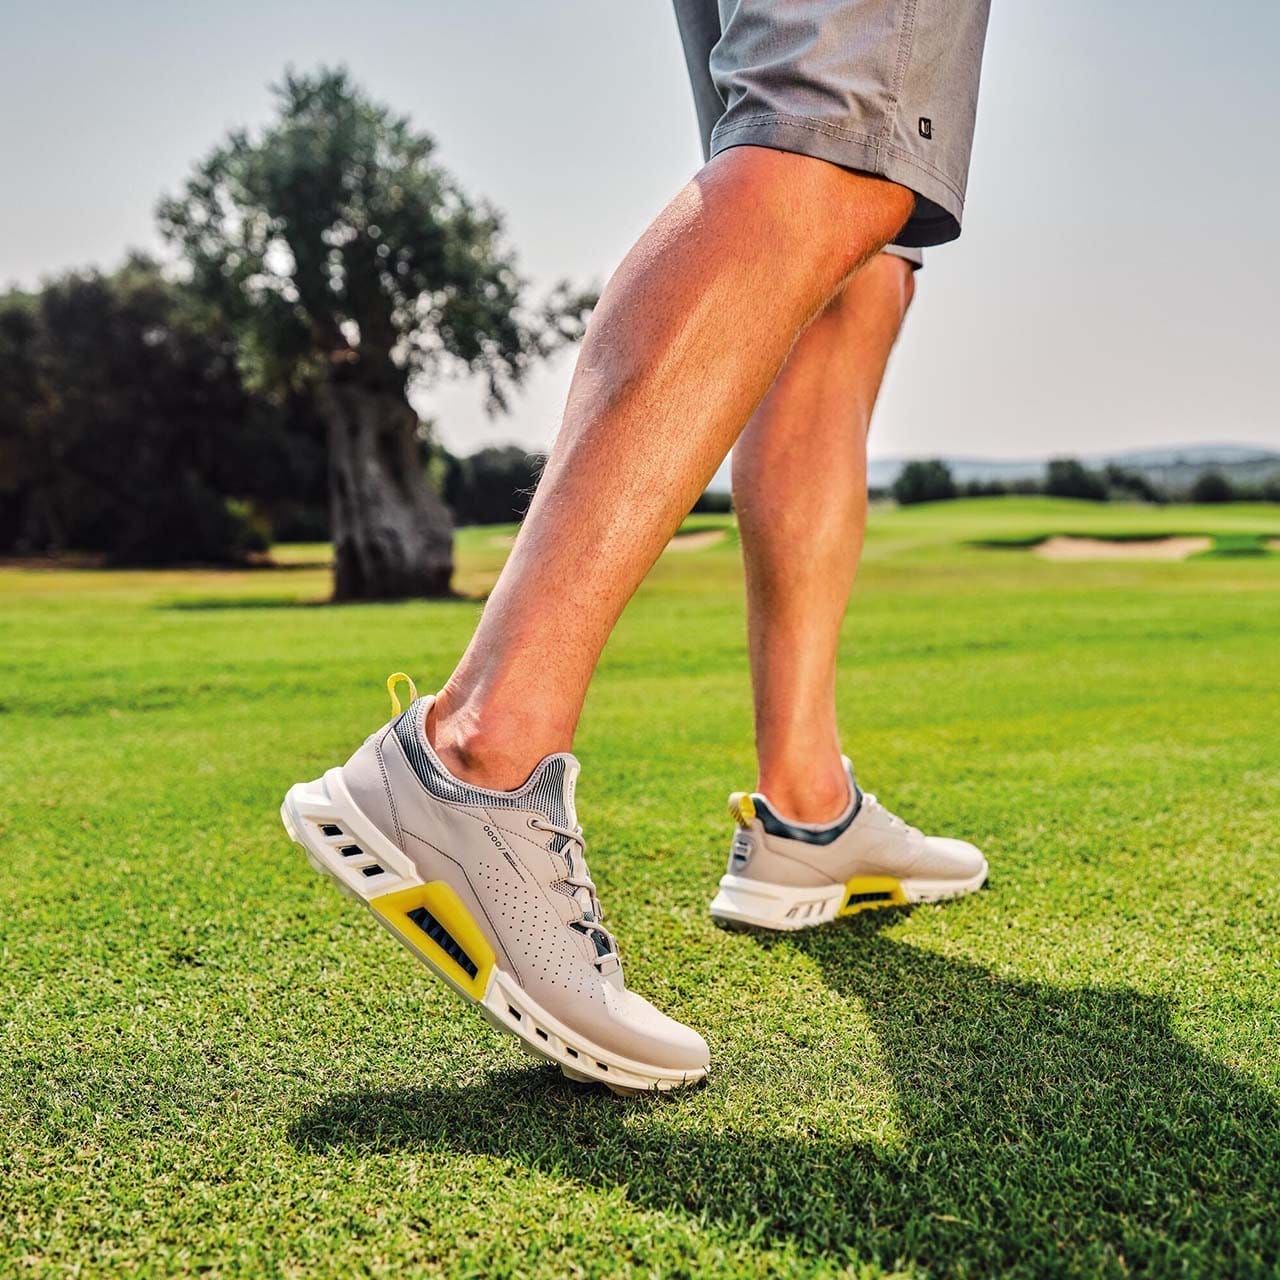 Man on golf course wearing gray and yellow golf shoes